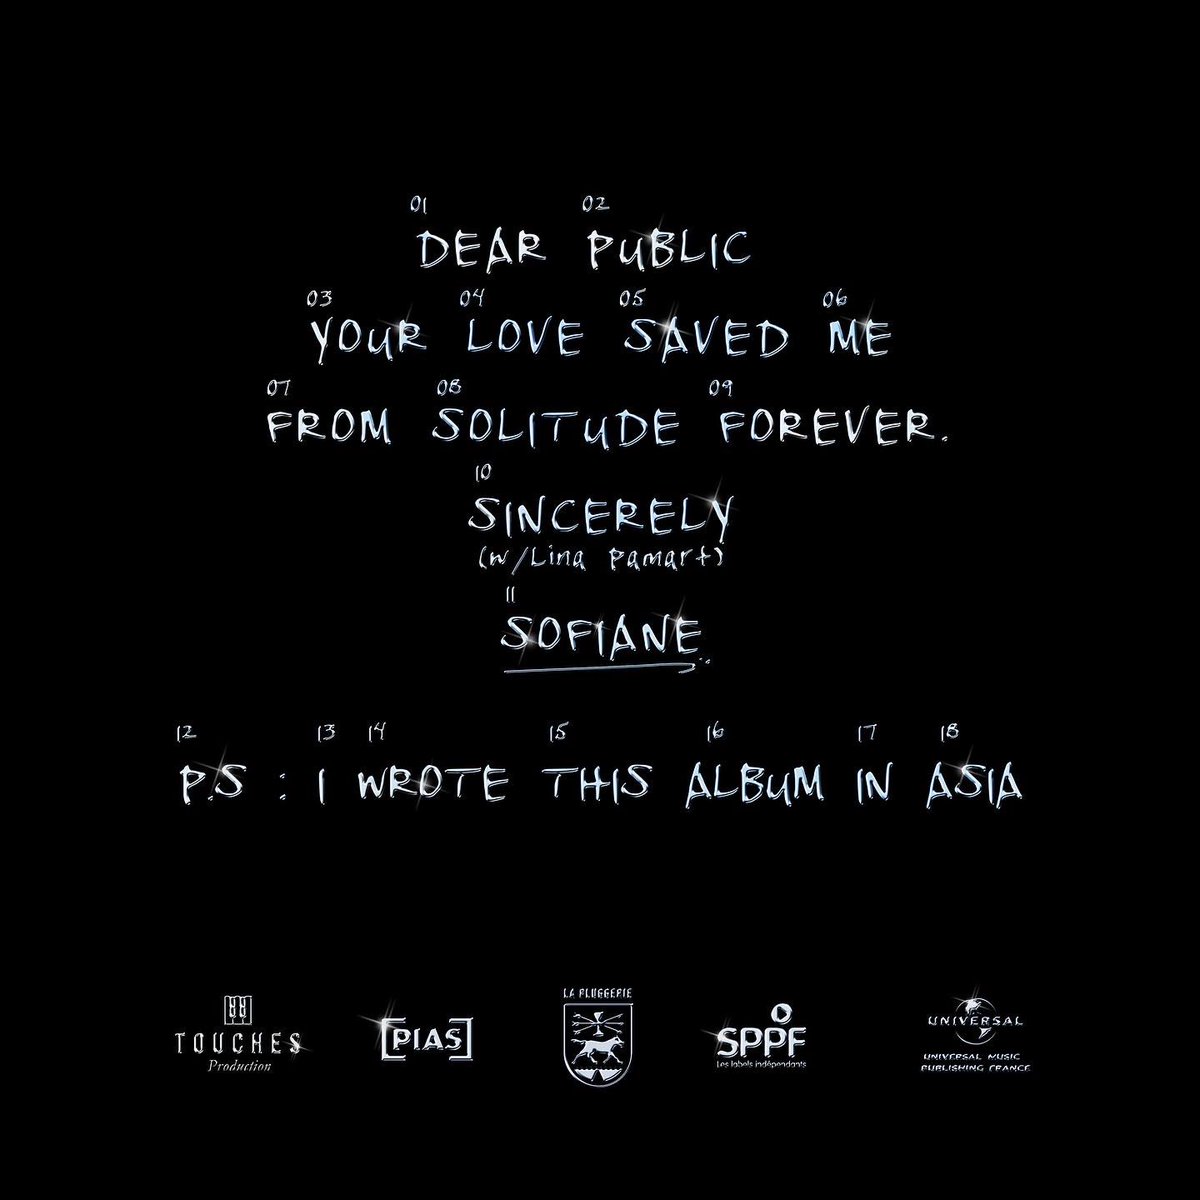 Sofiane Pamart on X: this is my new album tracklist ✉️ LETTER ✍🏽 February  11  / X